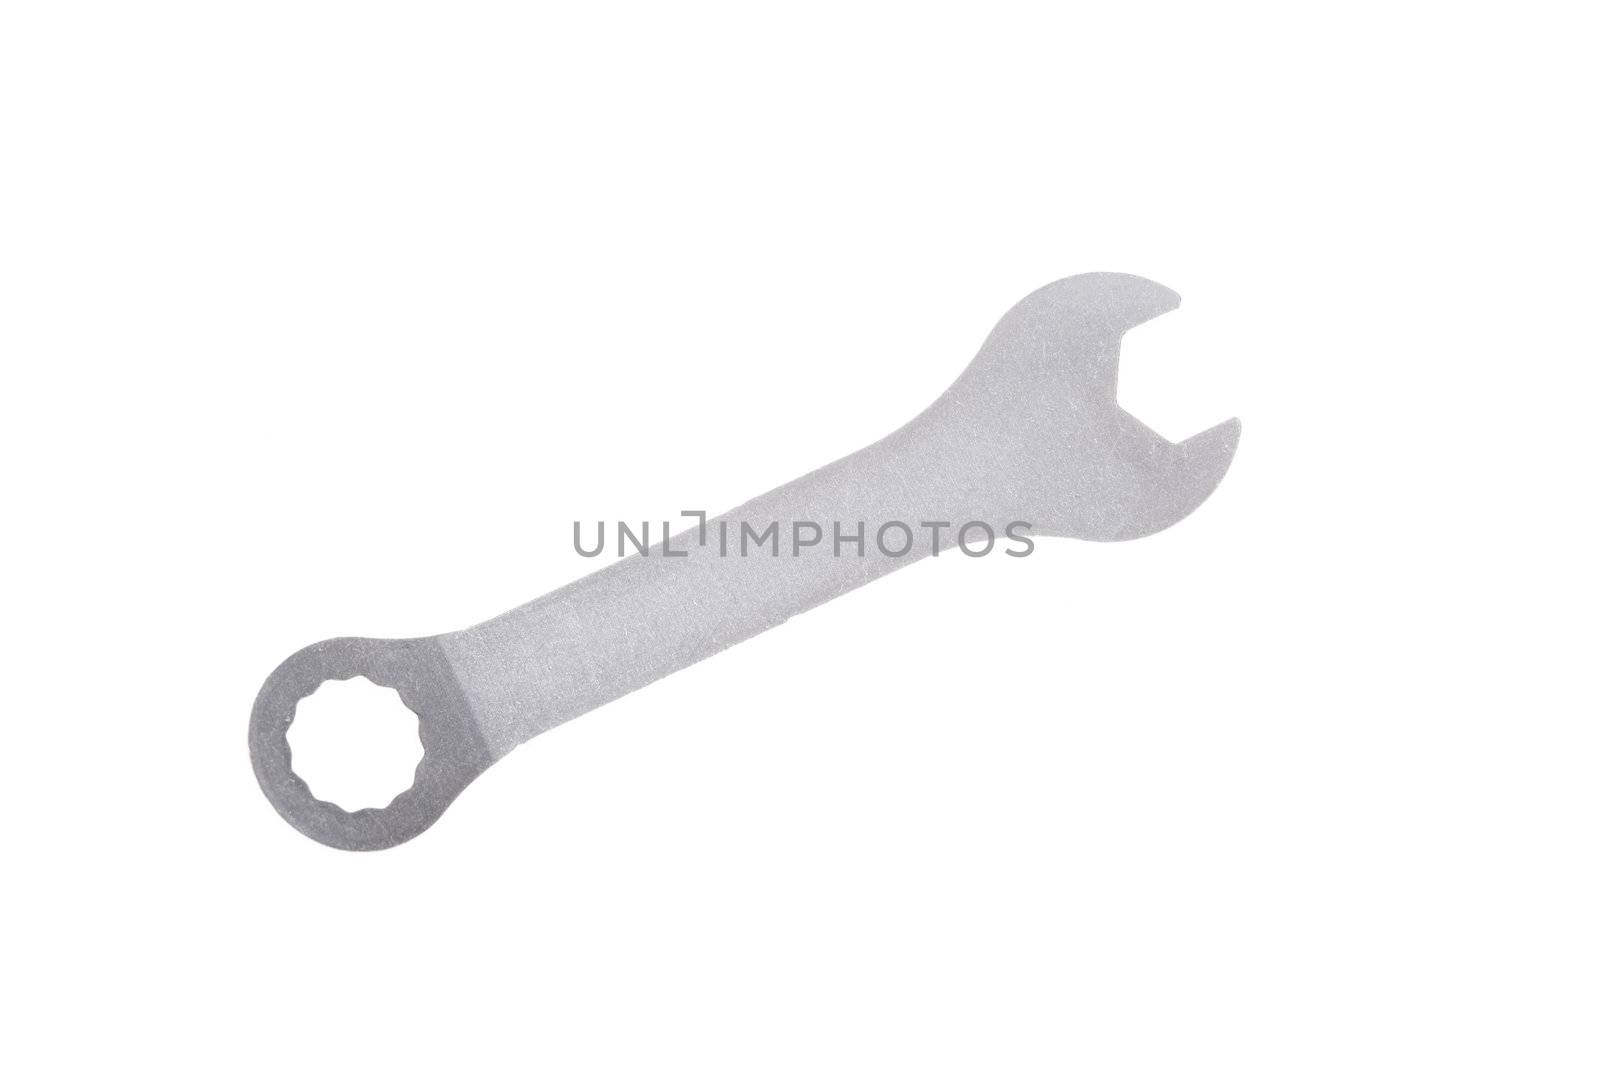 Wrench isolated on white